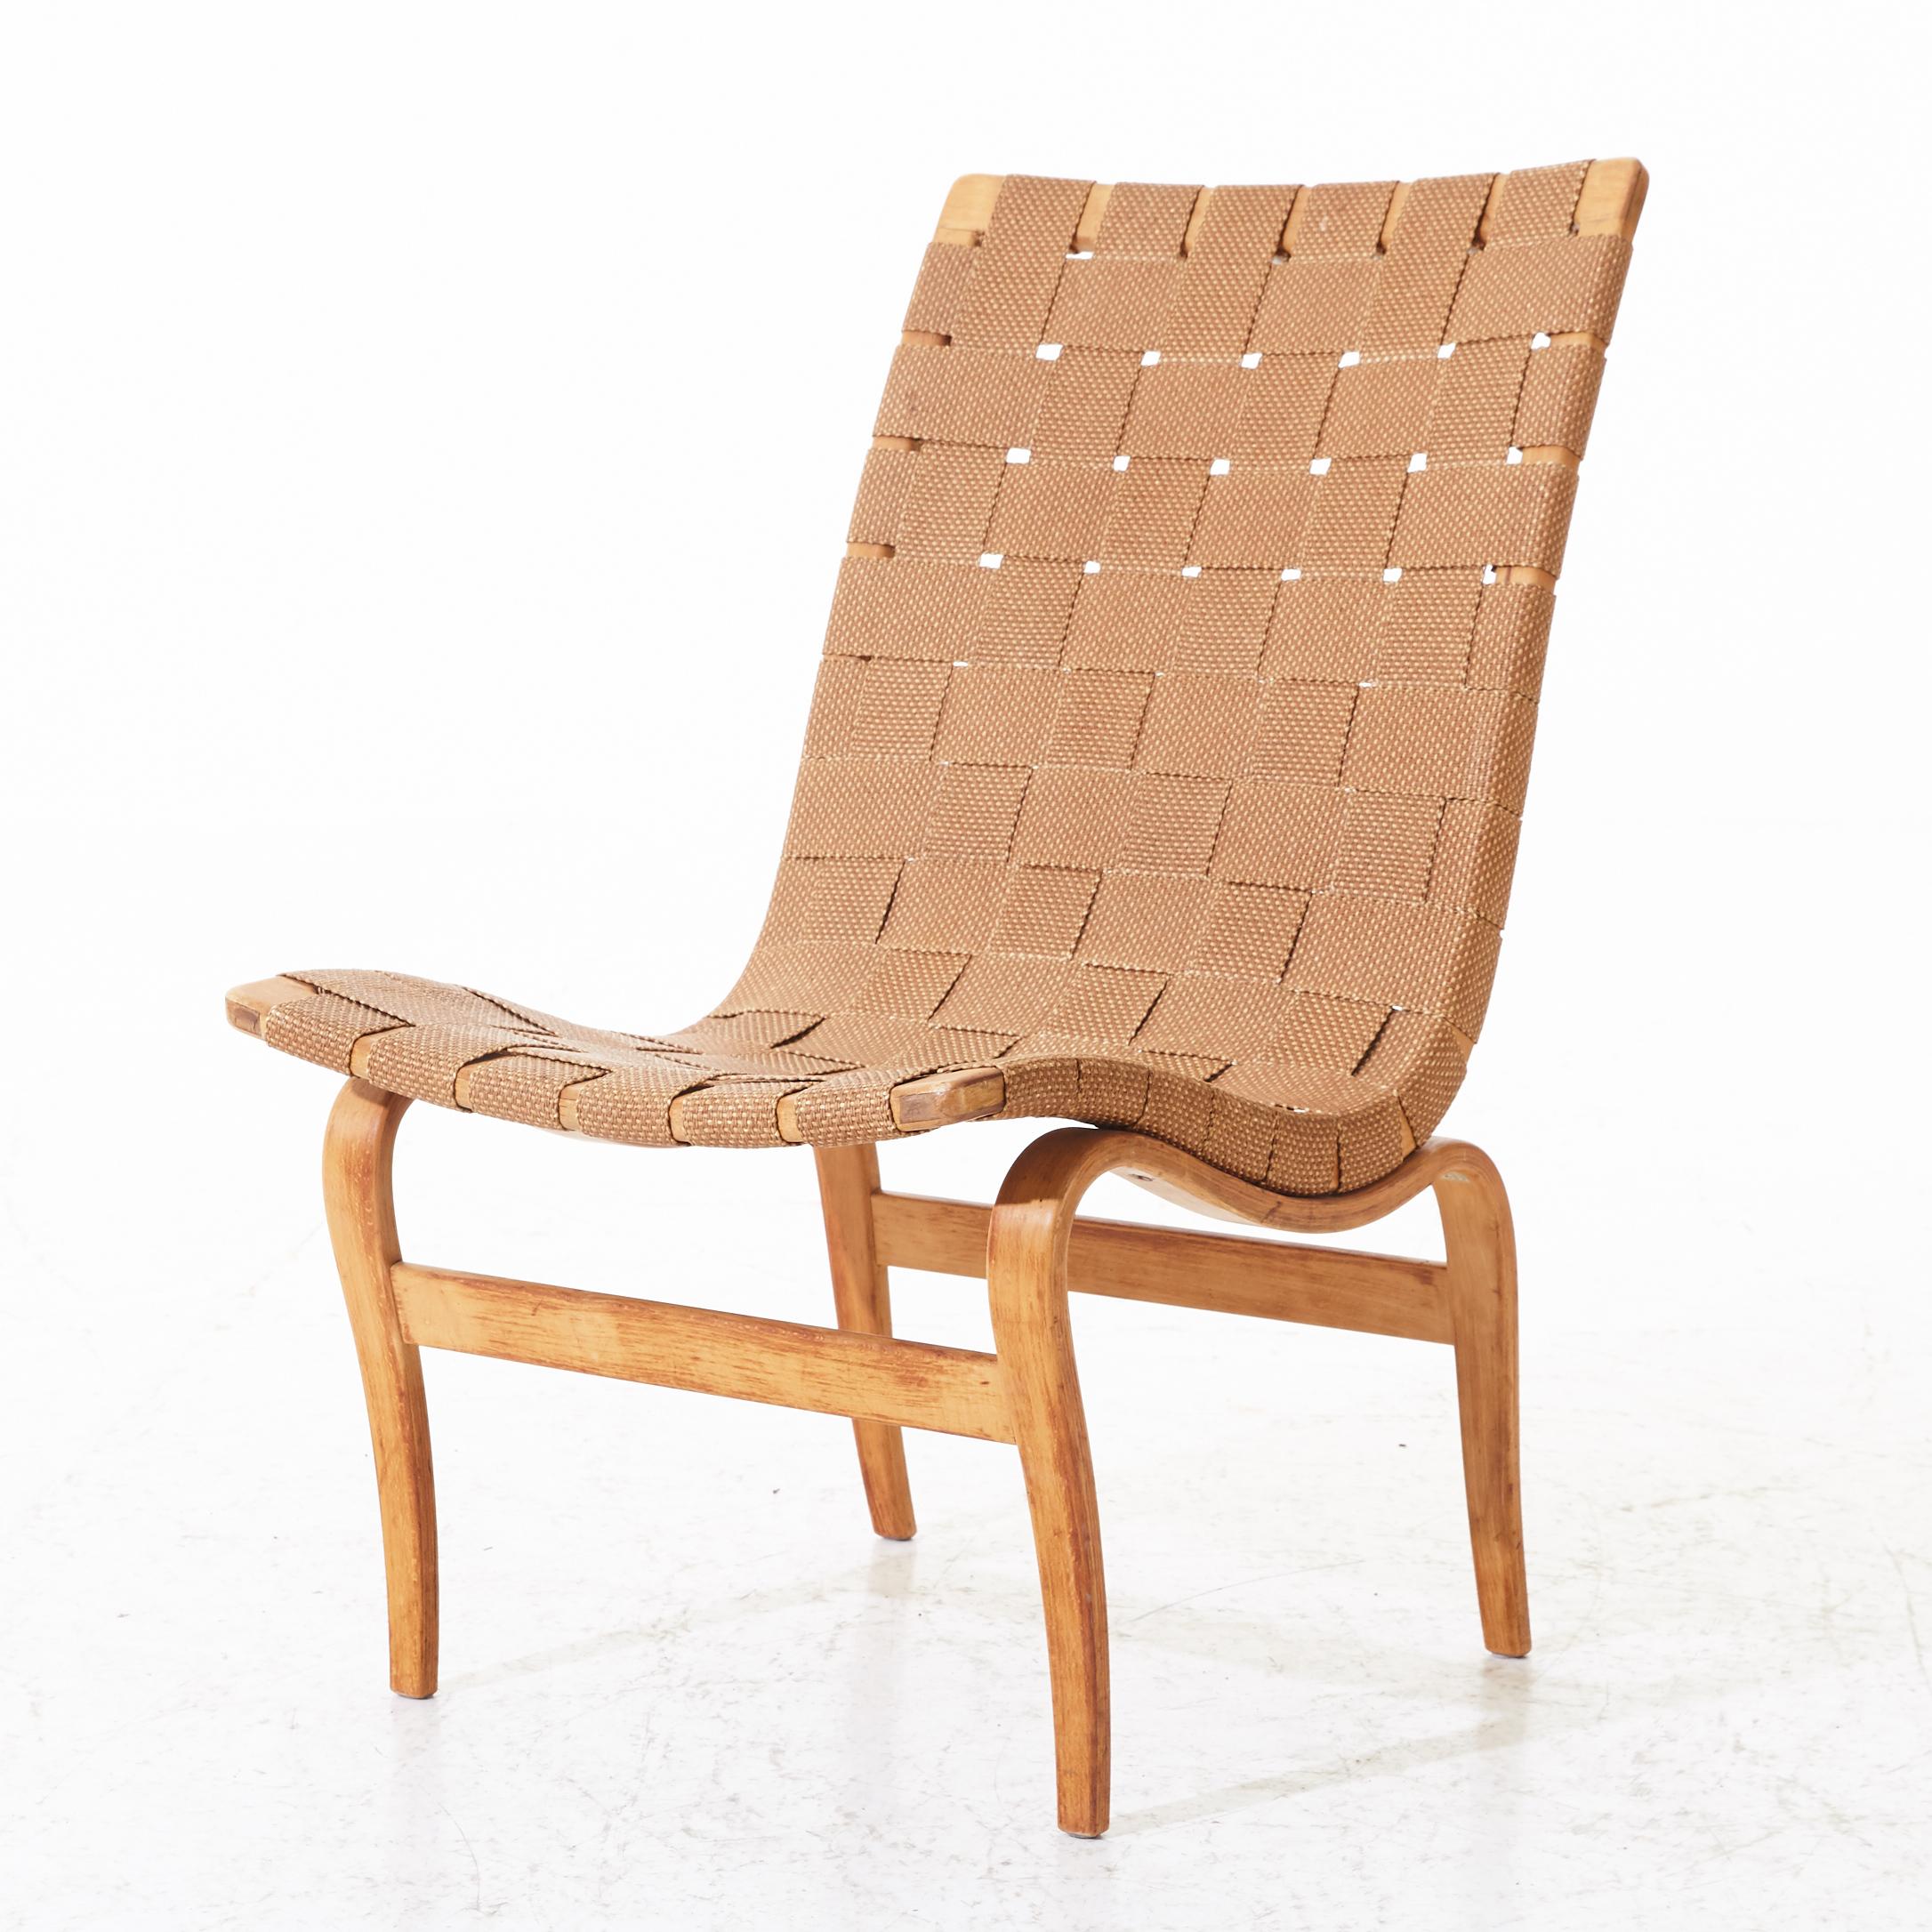 Mid-20th Century Chair Designed by Bruno Mathsson, Sweden, 1941 For Sale